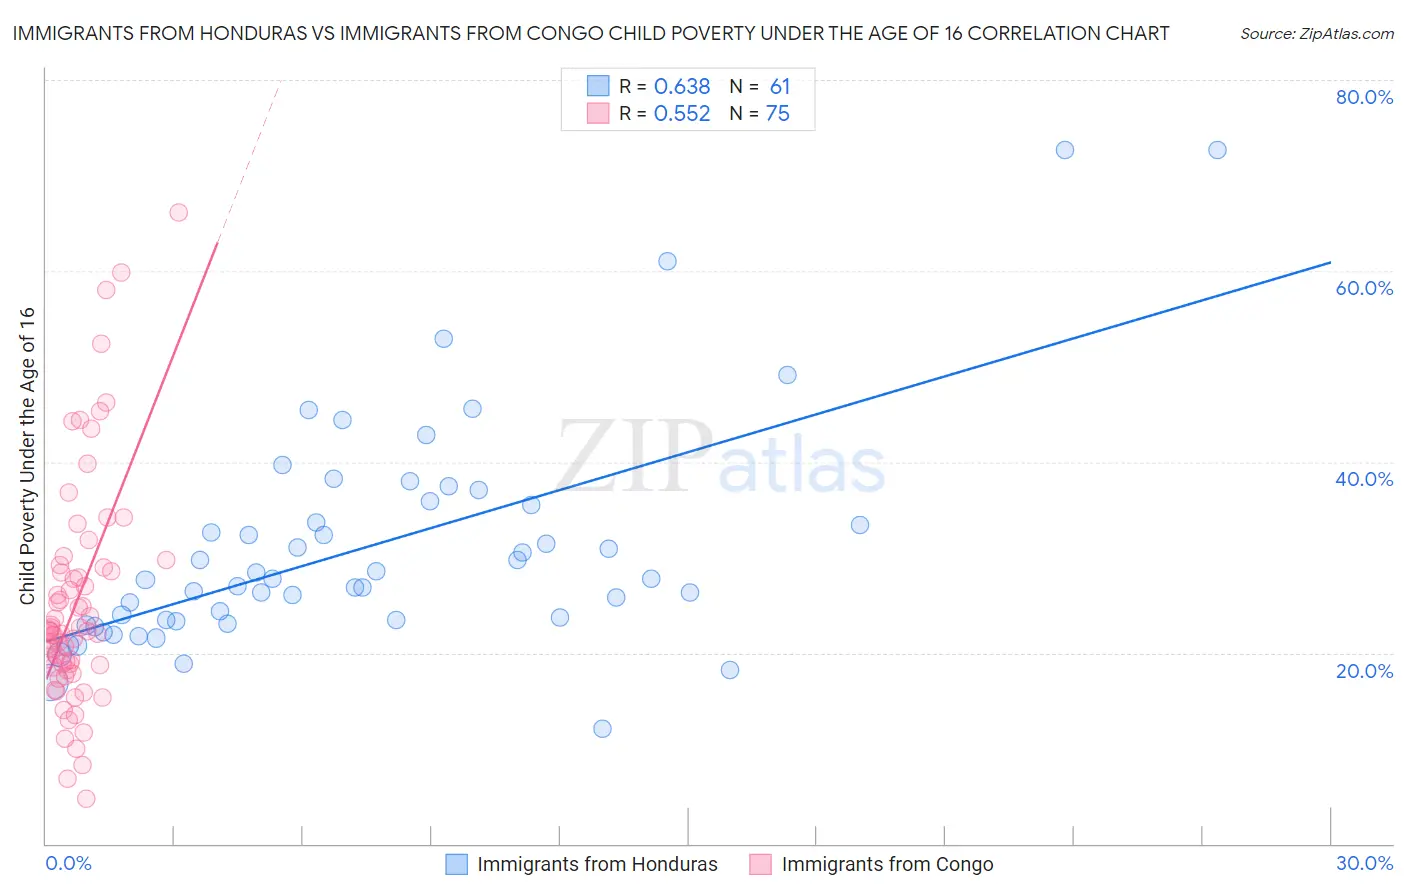 Immigrants from Honduras vs Immigrants from Congo Child Poverty Under the Age of 16